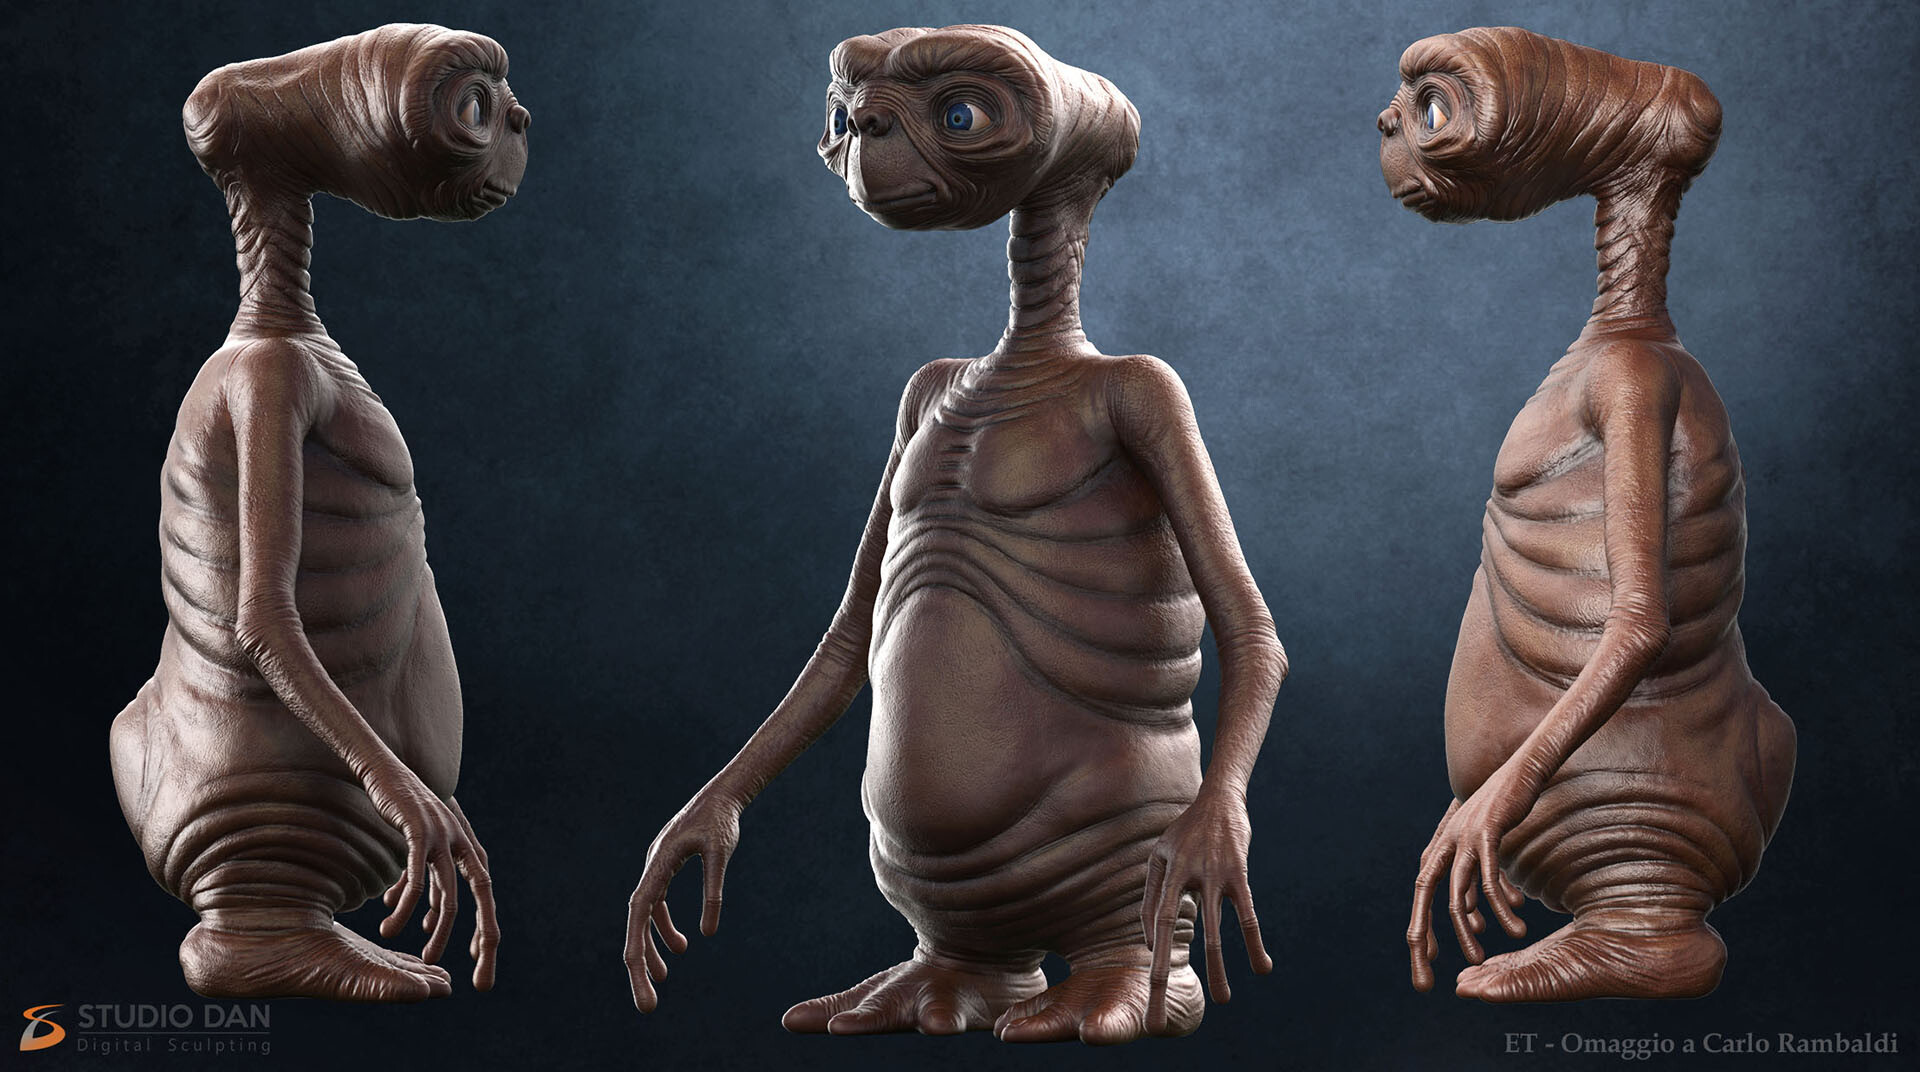 The Grownups Who Never Saw 'E.T.' Because E.T. Freaked Them Out